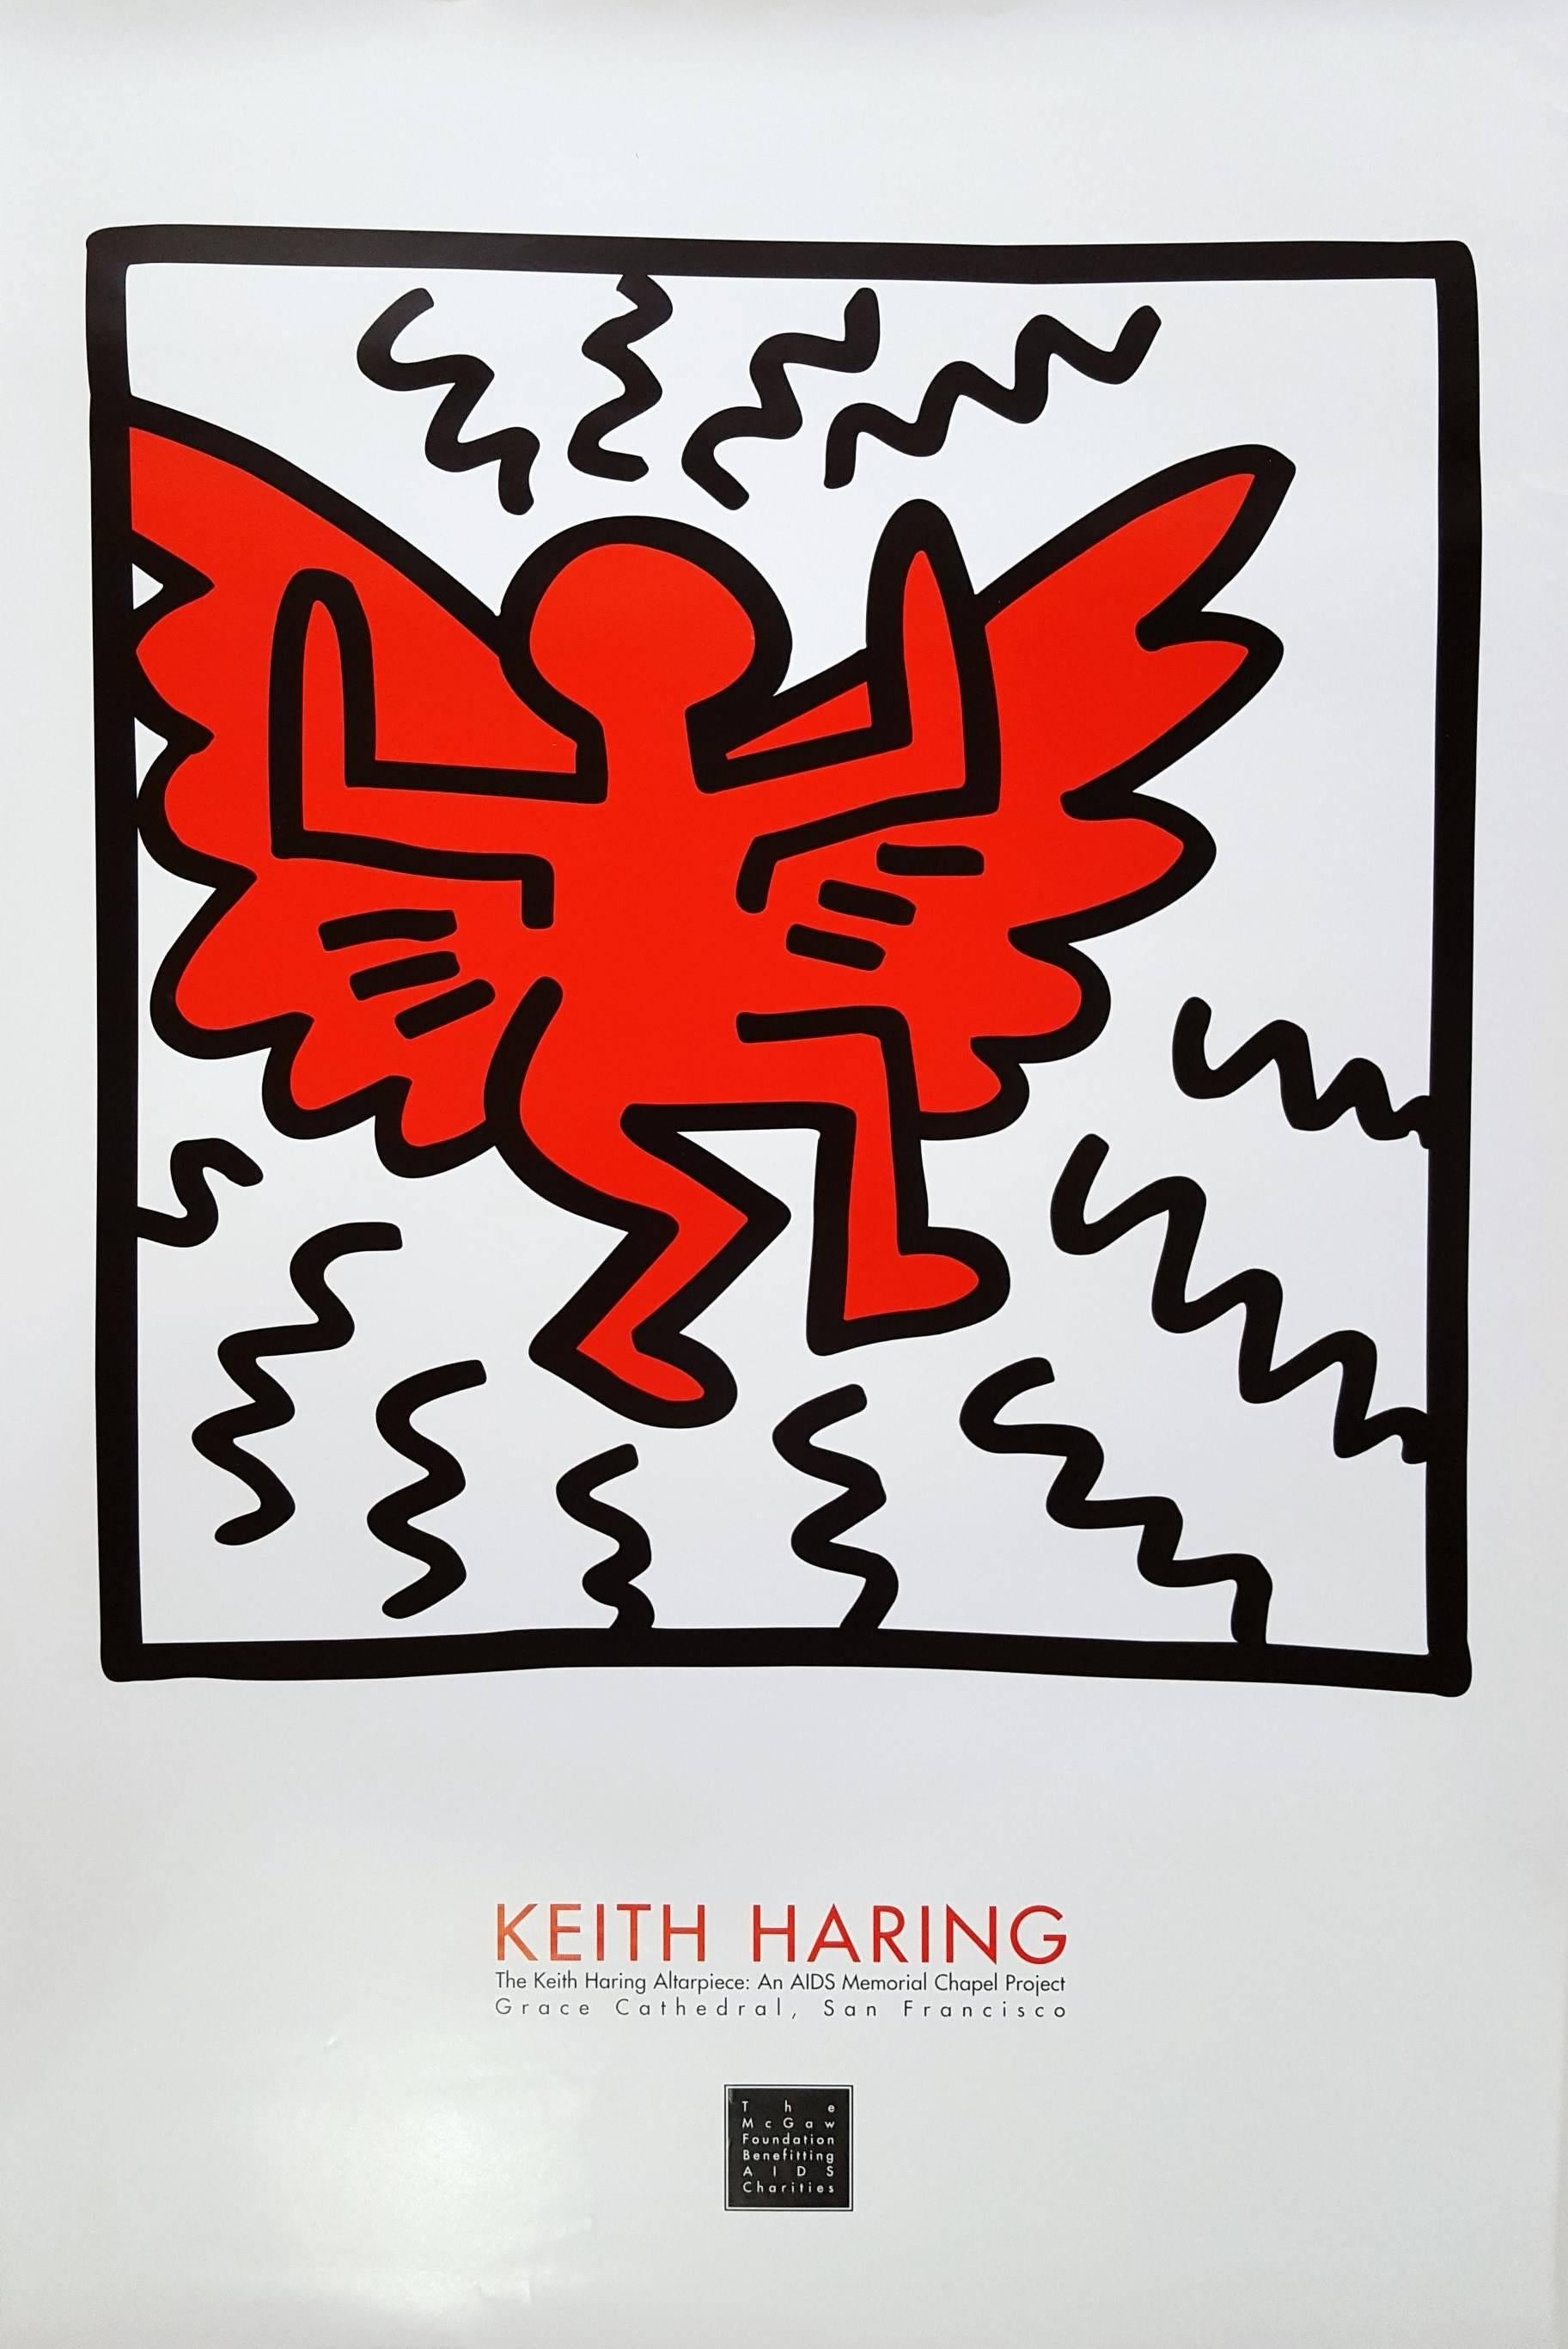 (after) Keith Haring Figurative Print - The Keith Haring Altarpiece: An AIDS Memorial Chapel Project